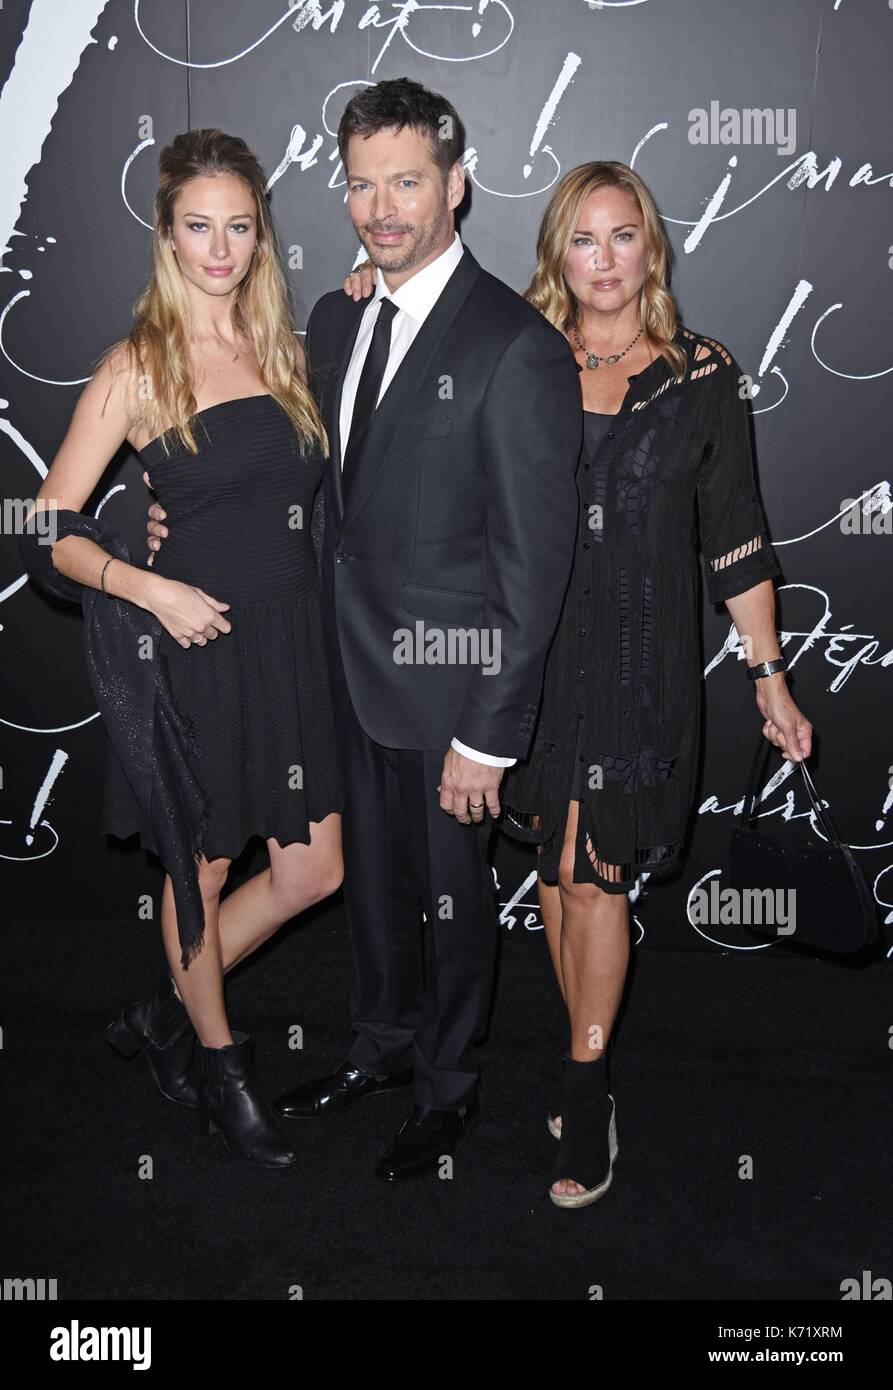 New York, NY, USA. 13th Sep, 2017. Sarah Kate Connick, Harry Connick Jr.,  Jill Goodacre Connick at arrivals for MOTHER! Premiere, Radio City Music  Hall, New York, NY September 13, 2017. Credit: